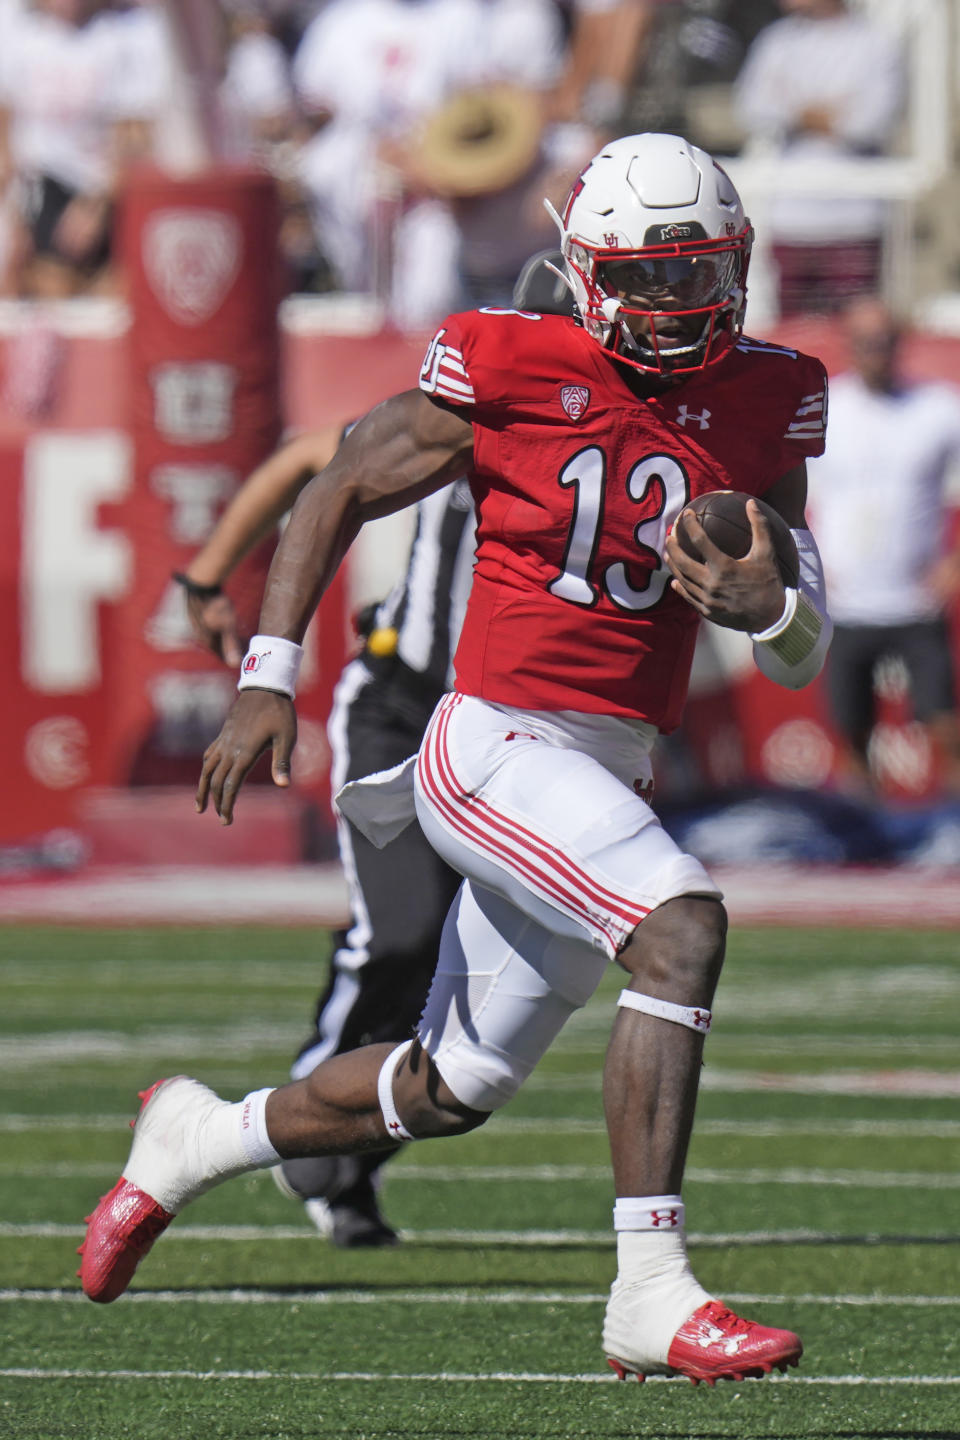 Utah quarterback Nate Johnson (13) carries the ball during the first half of an NCAA college football game against UCLA, Saturday, Sept. 23, 2023, in Salt Lake City. (AP Photo/Rick Bowmer)